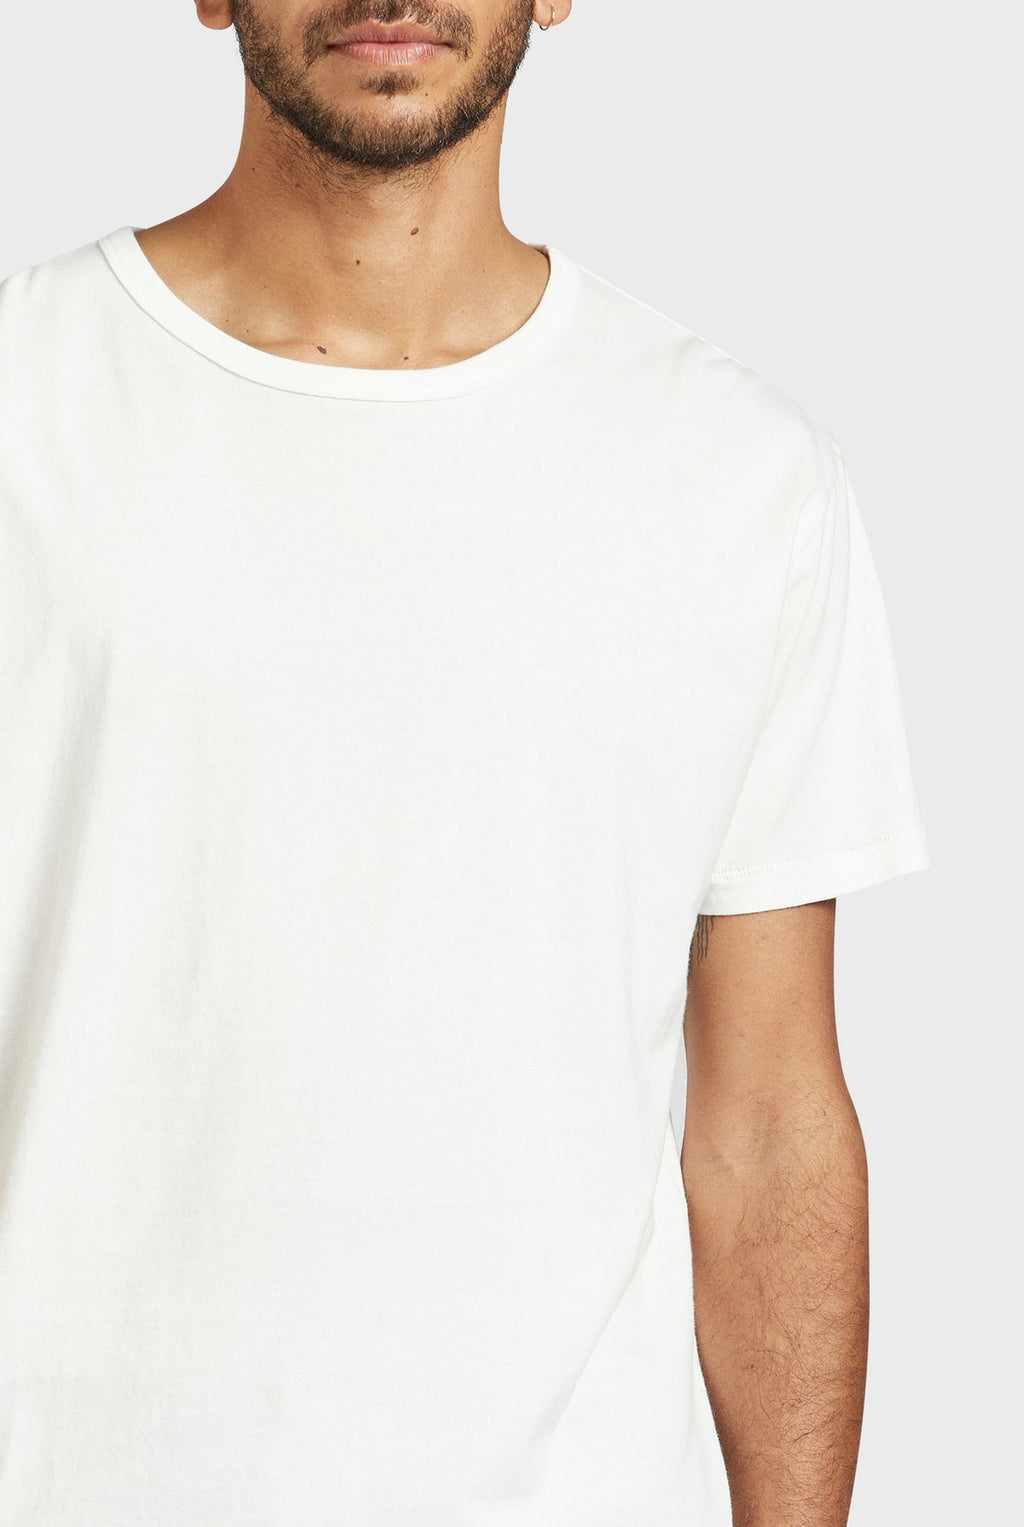 The Academy Brand Jimmy Tee - White